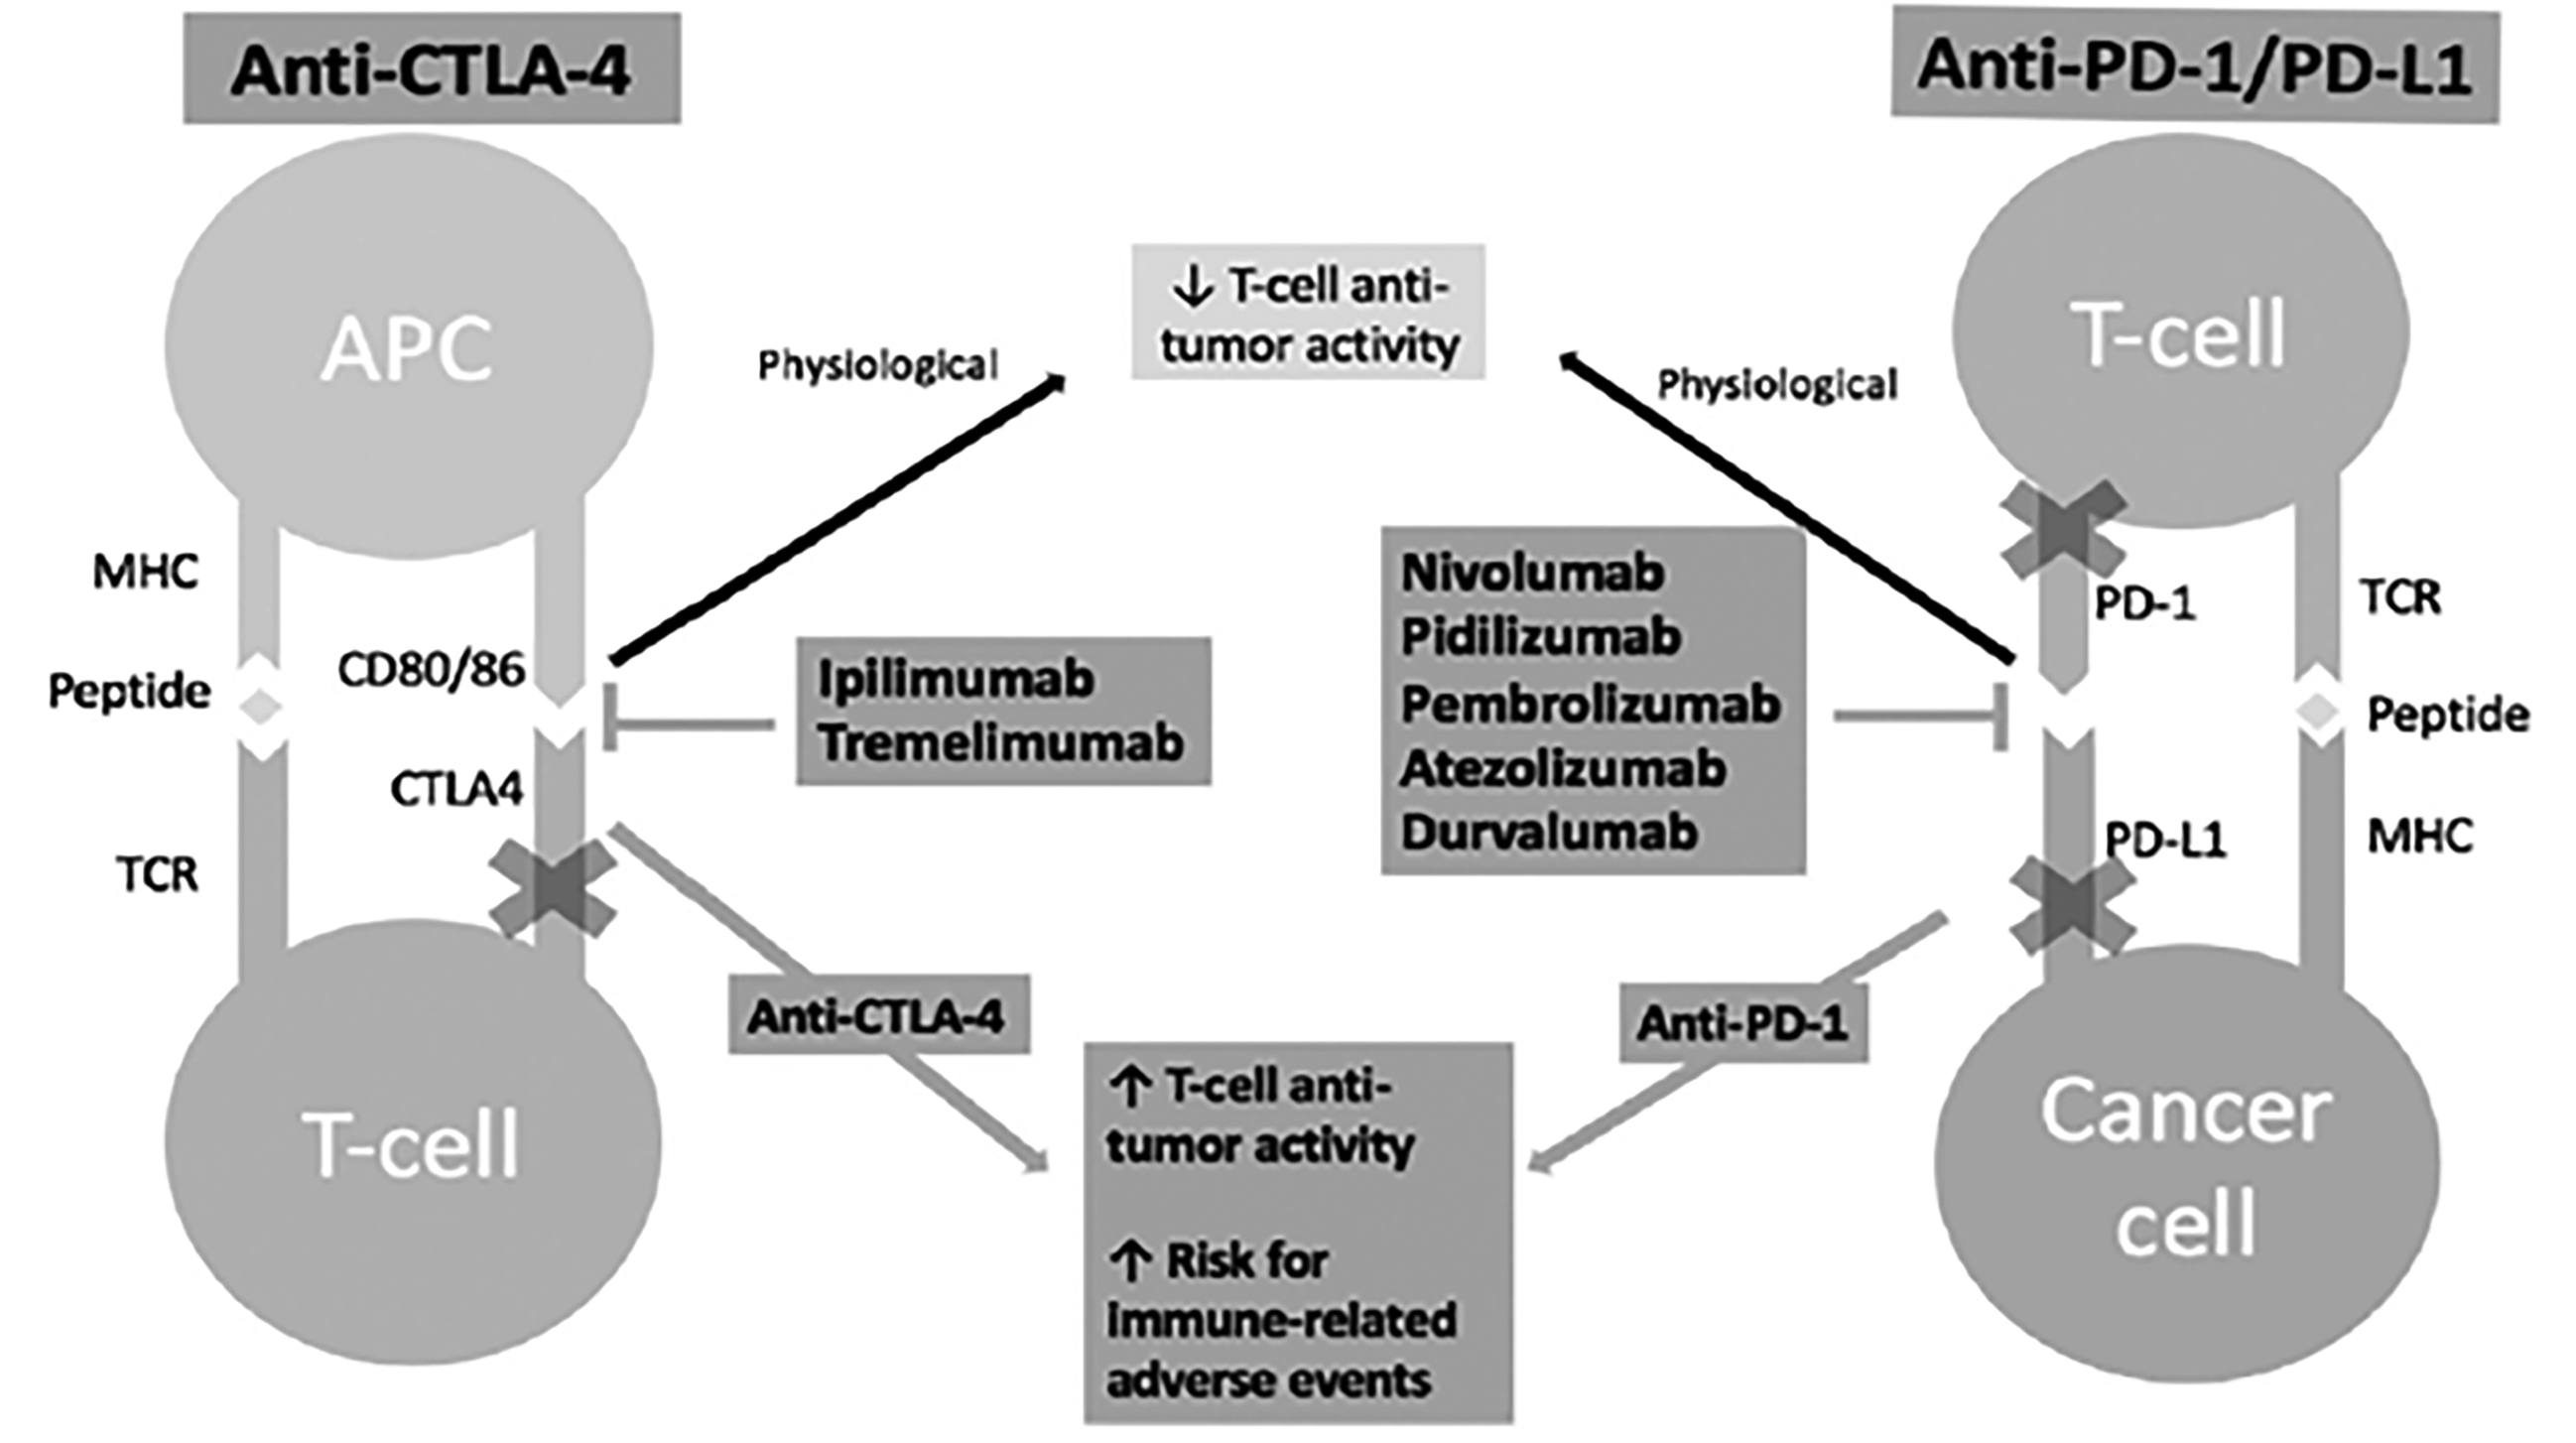 Mechanism of Action of Anti-CTLA-4 and Anti-PD-1 Agents